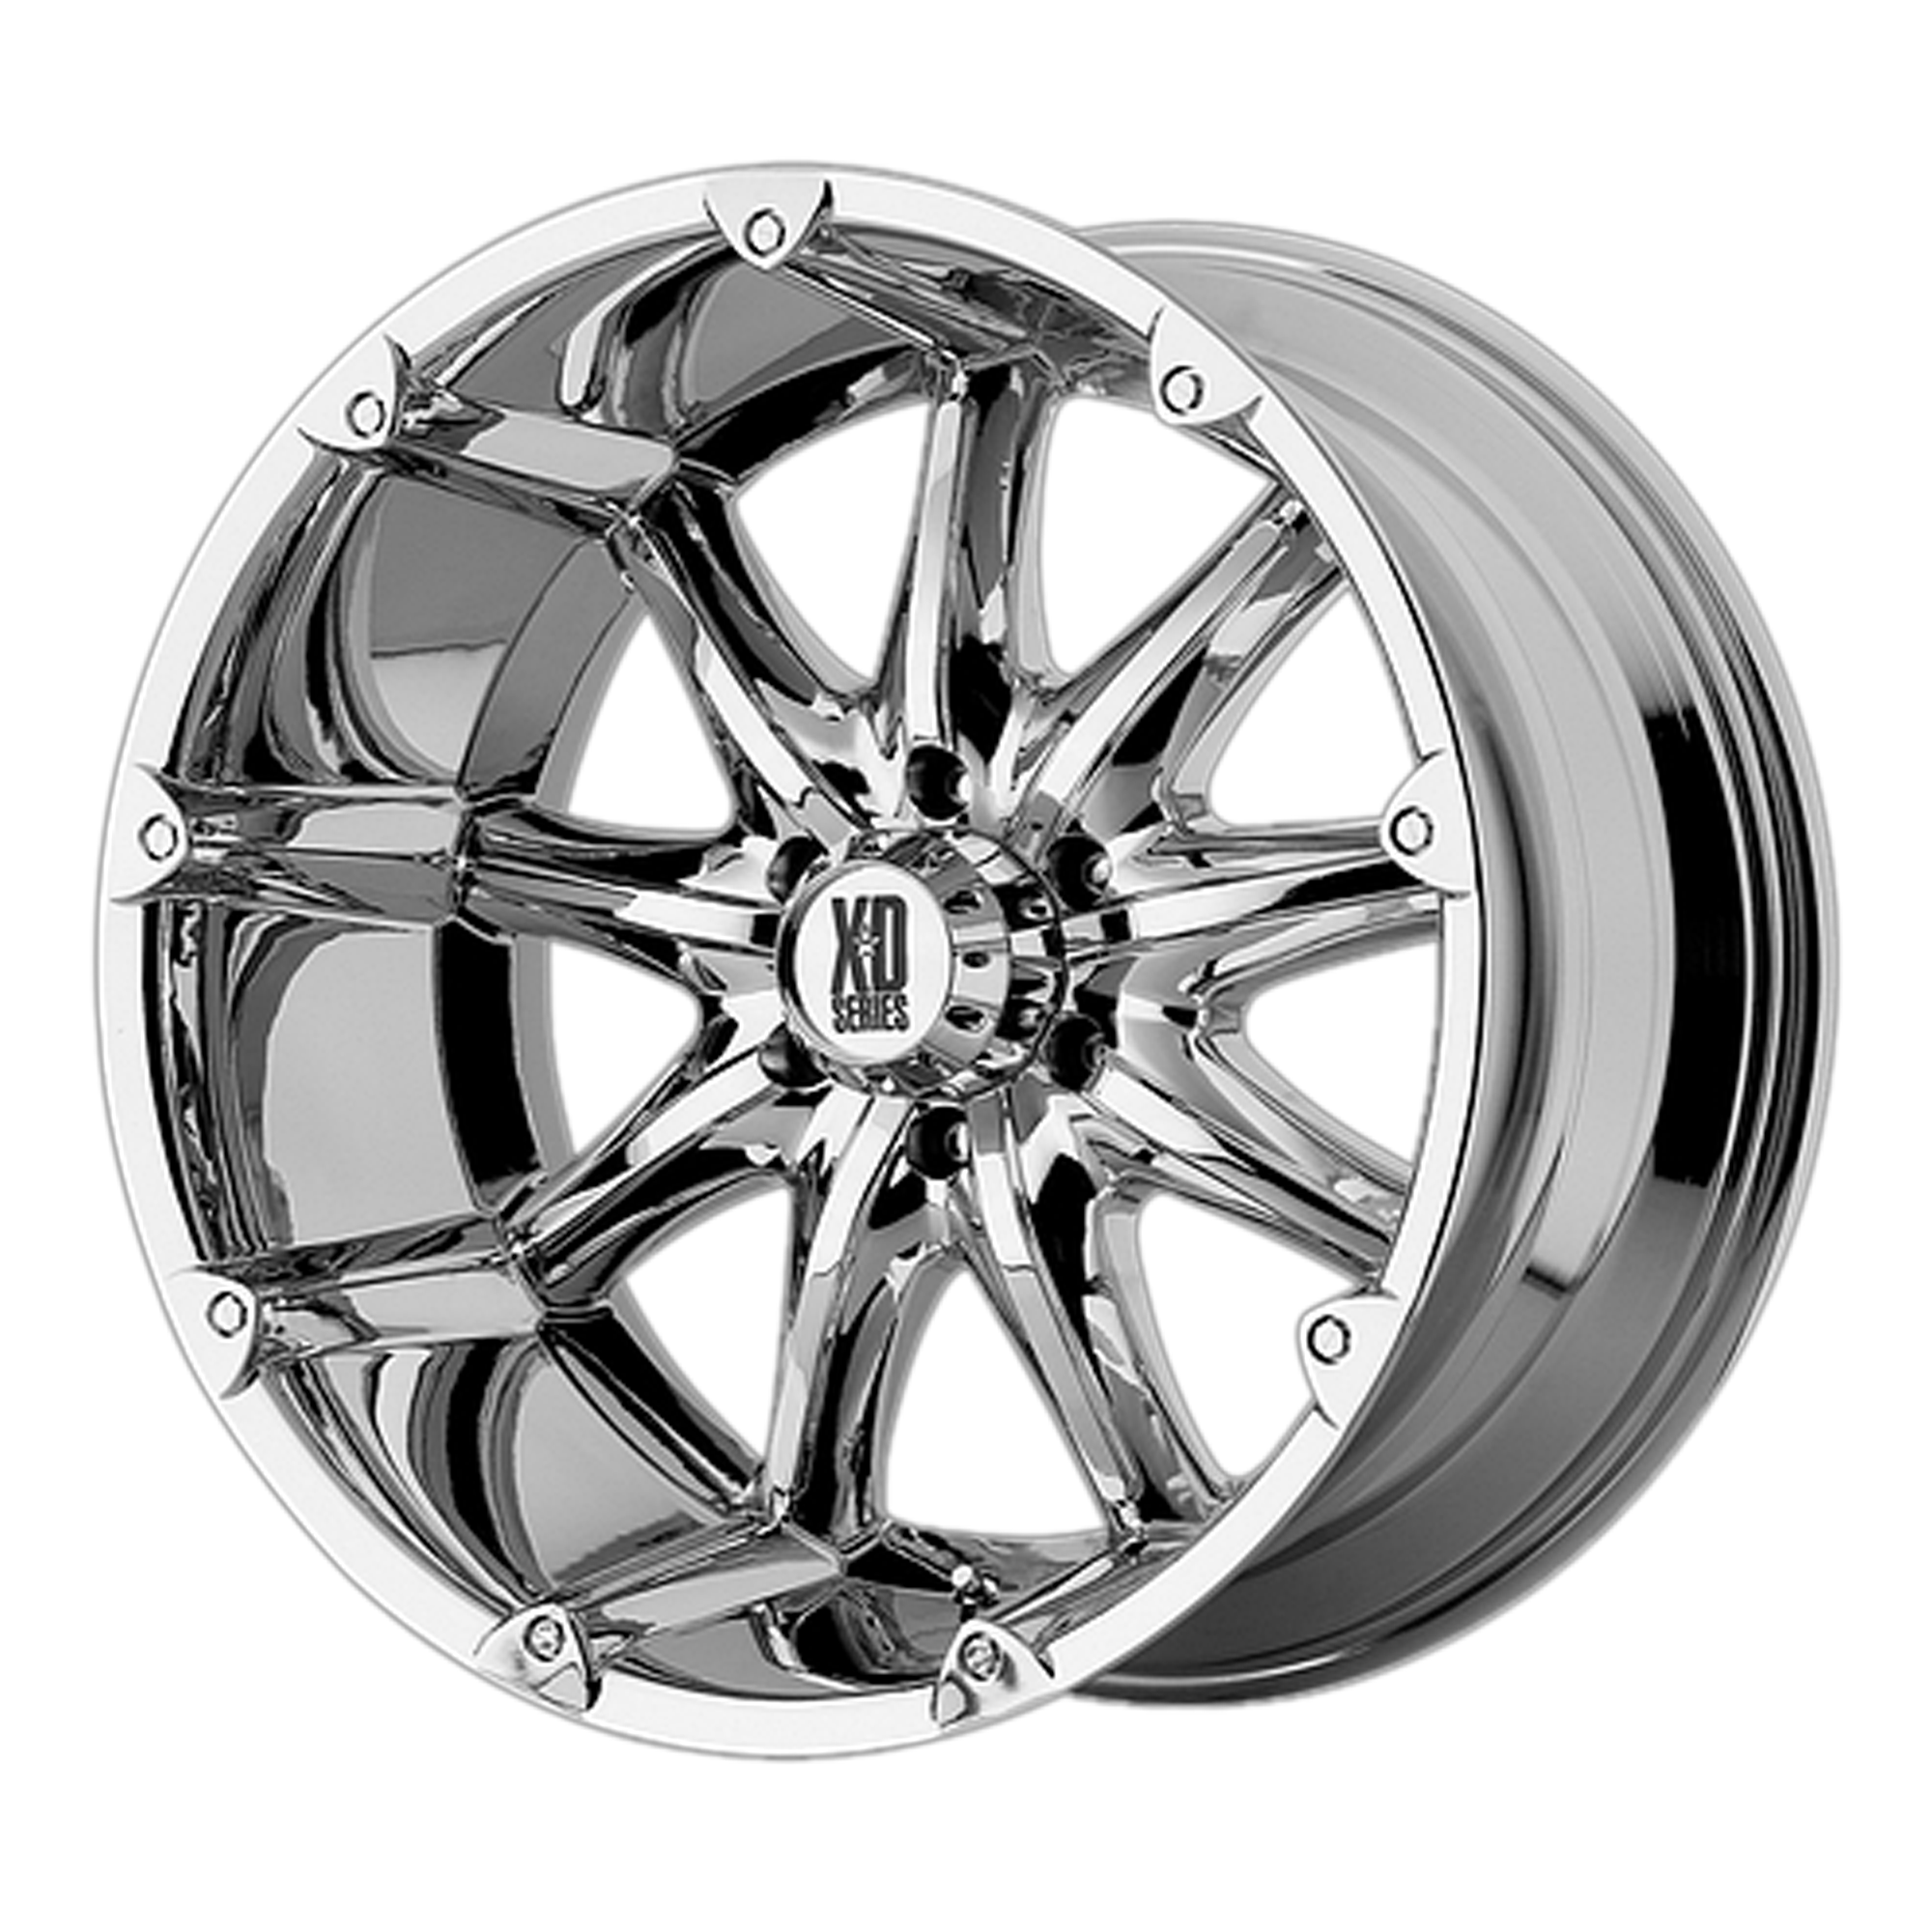 BADLANDS 20x9 6x135.00 CHROME (-12 mm) - Tires and Engine Performance